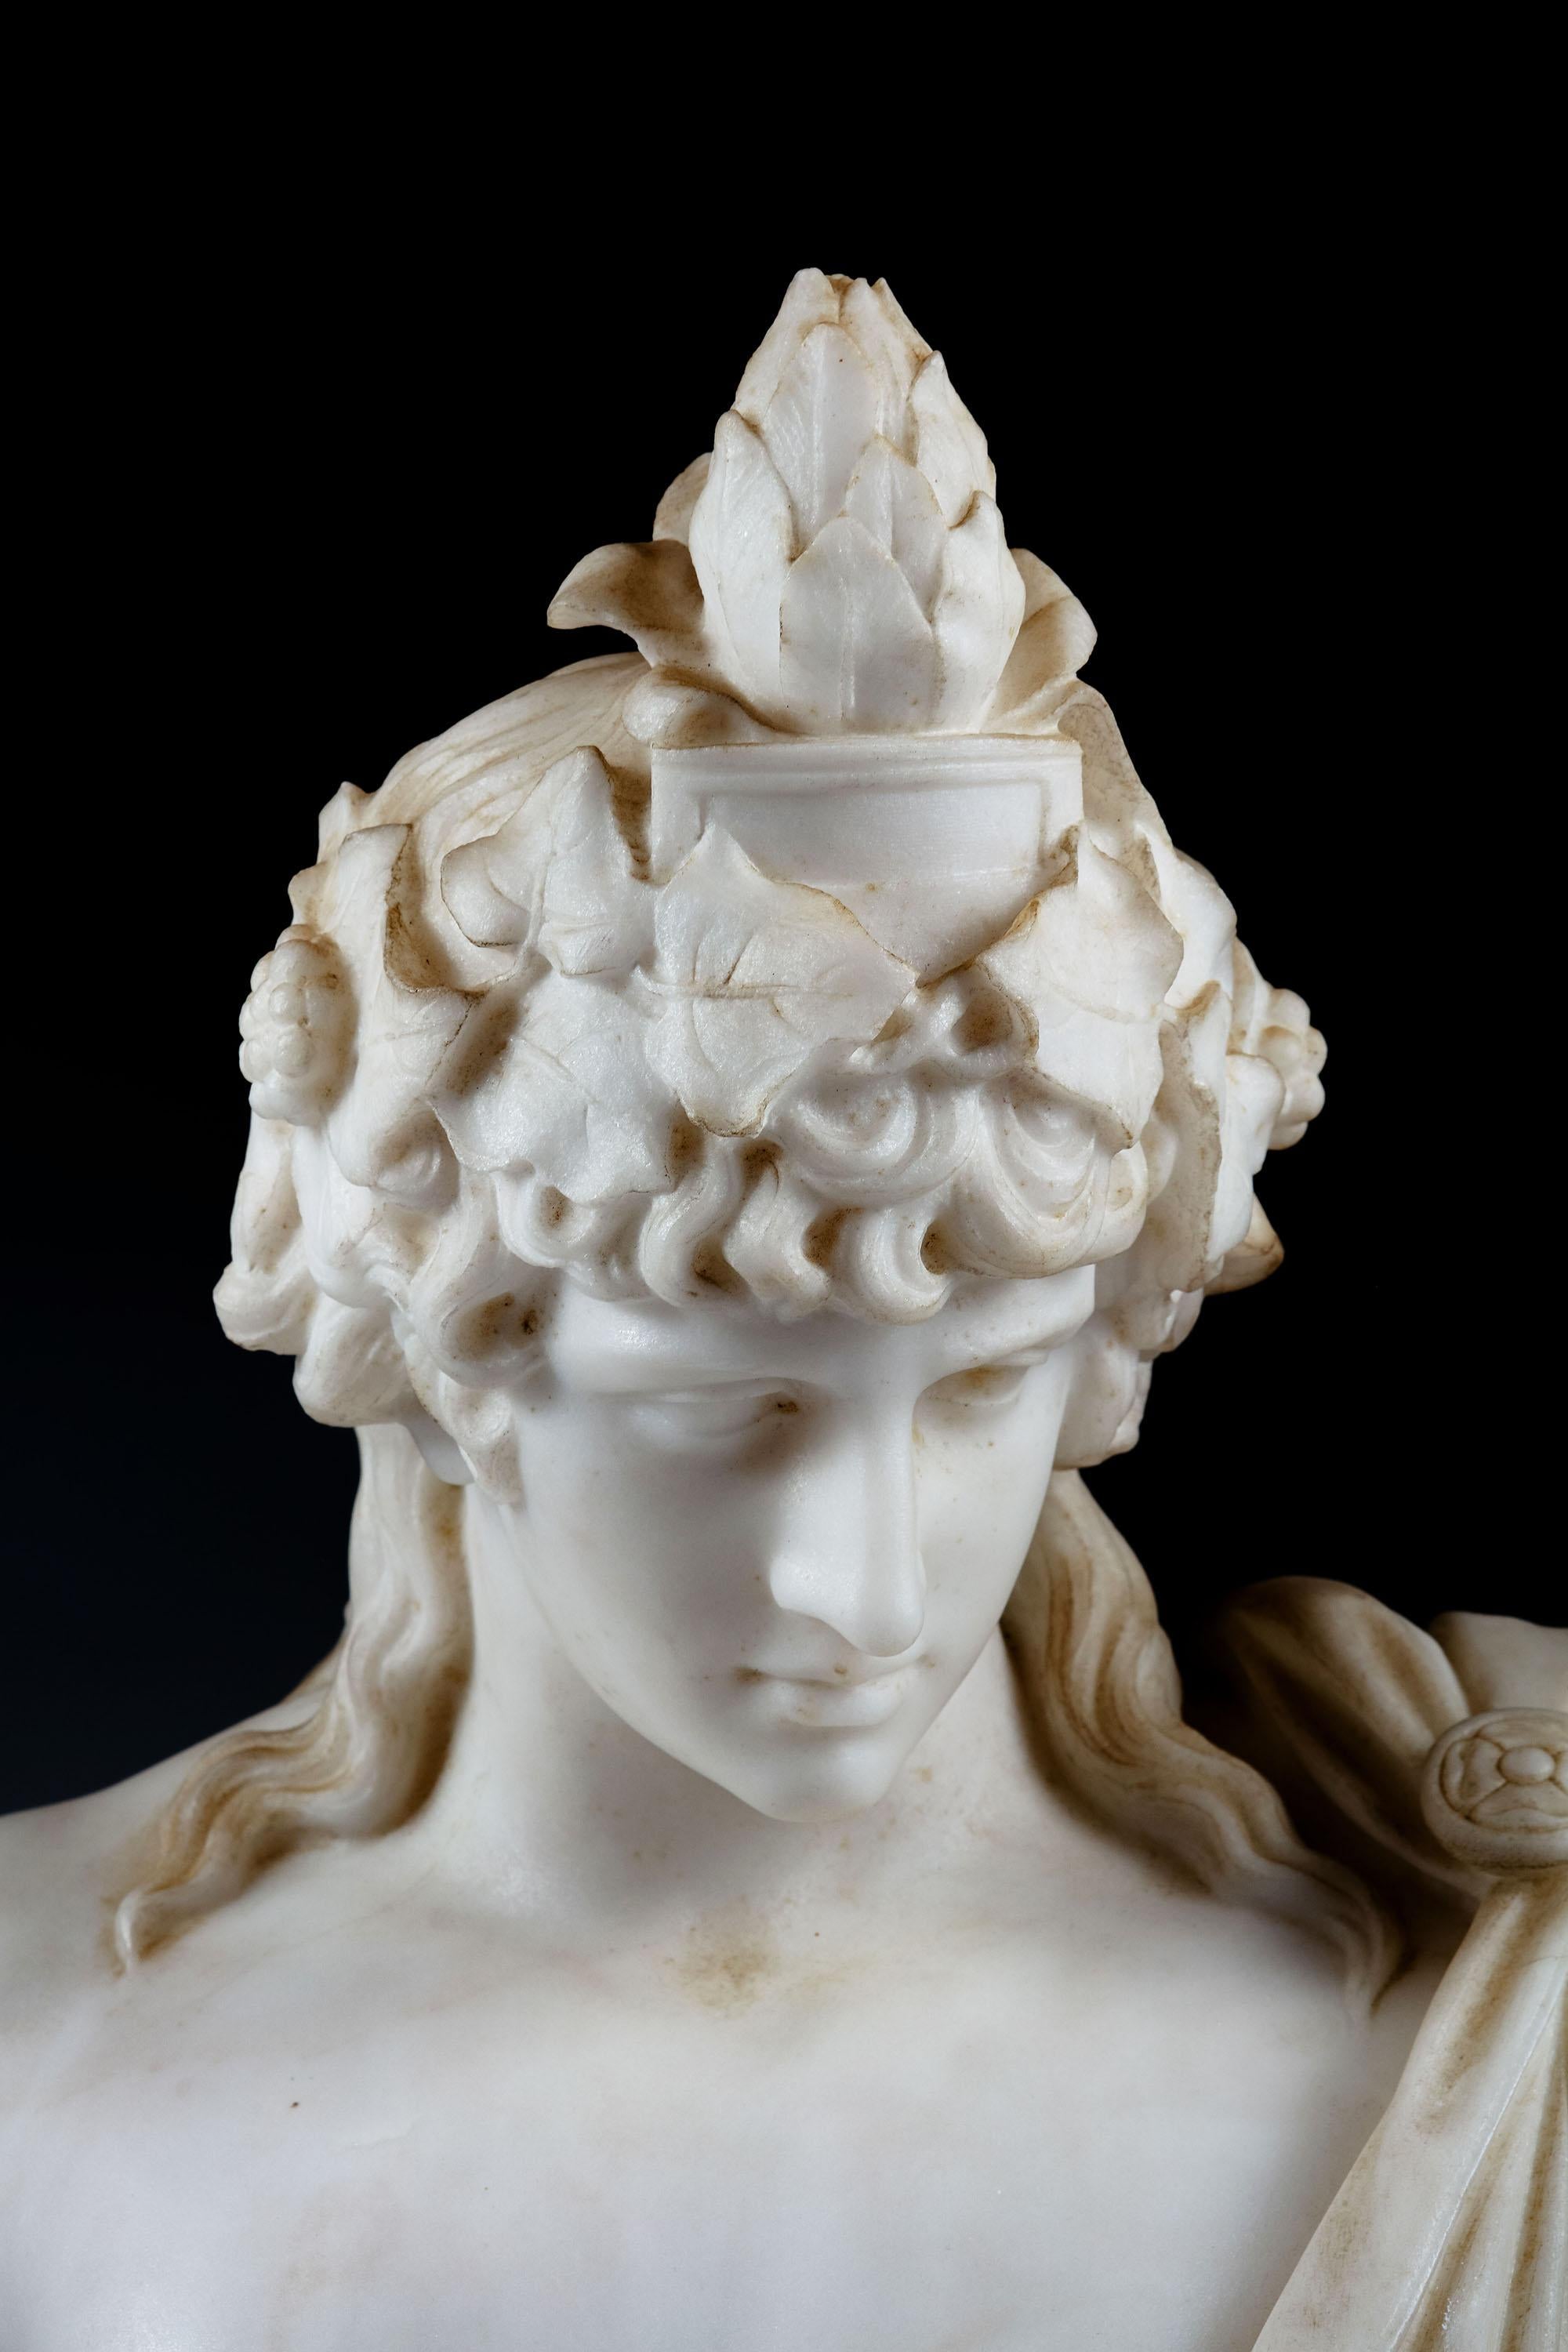 19th century statuary marble bust of the Braschi Antinous as Dionysus, Signed Puge
19th century statuary marble bust of Antinous as Dionysus, Signed Verso Puge

After the original full-length statue in Pio-Clementine Vatican Museum, discovered in